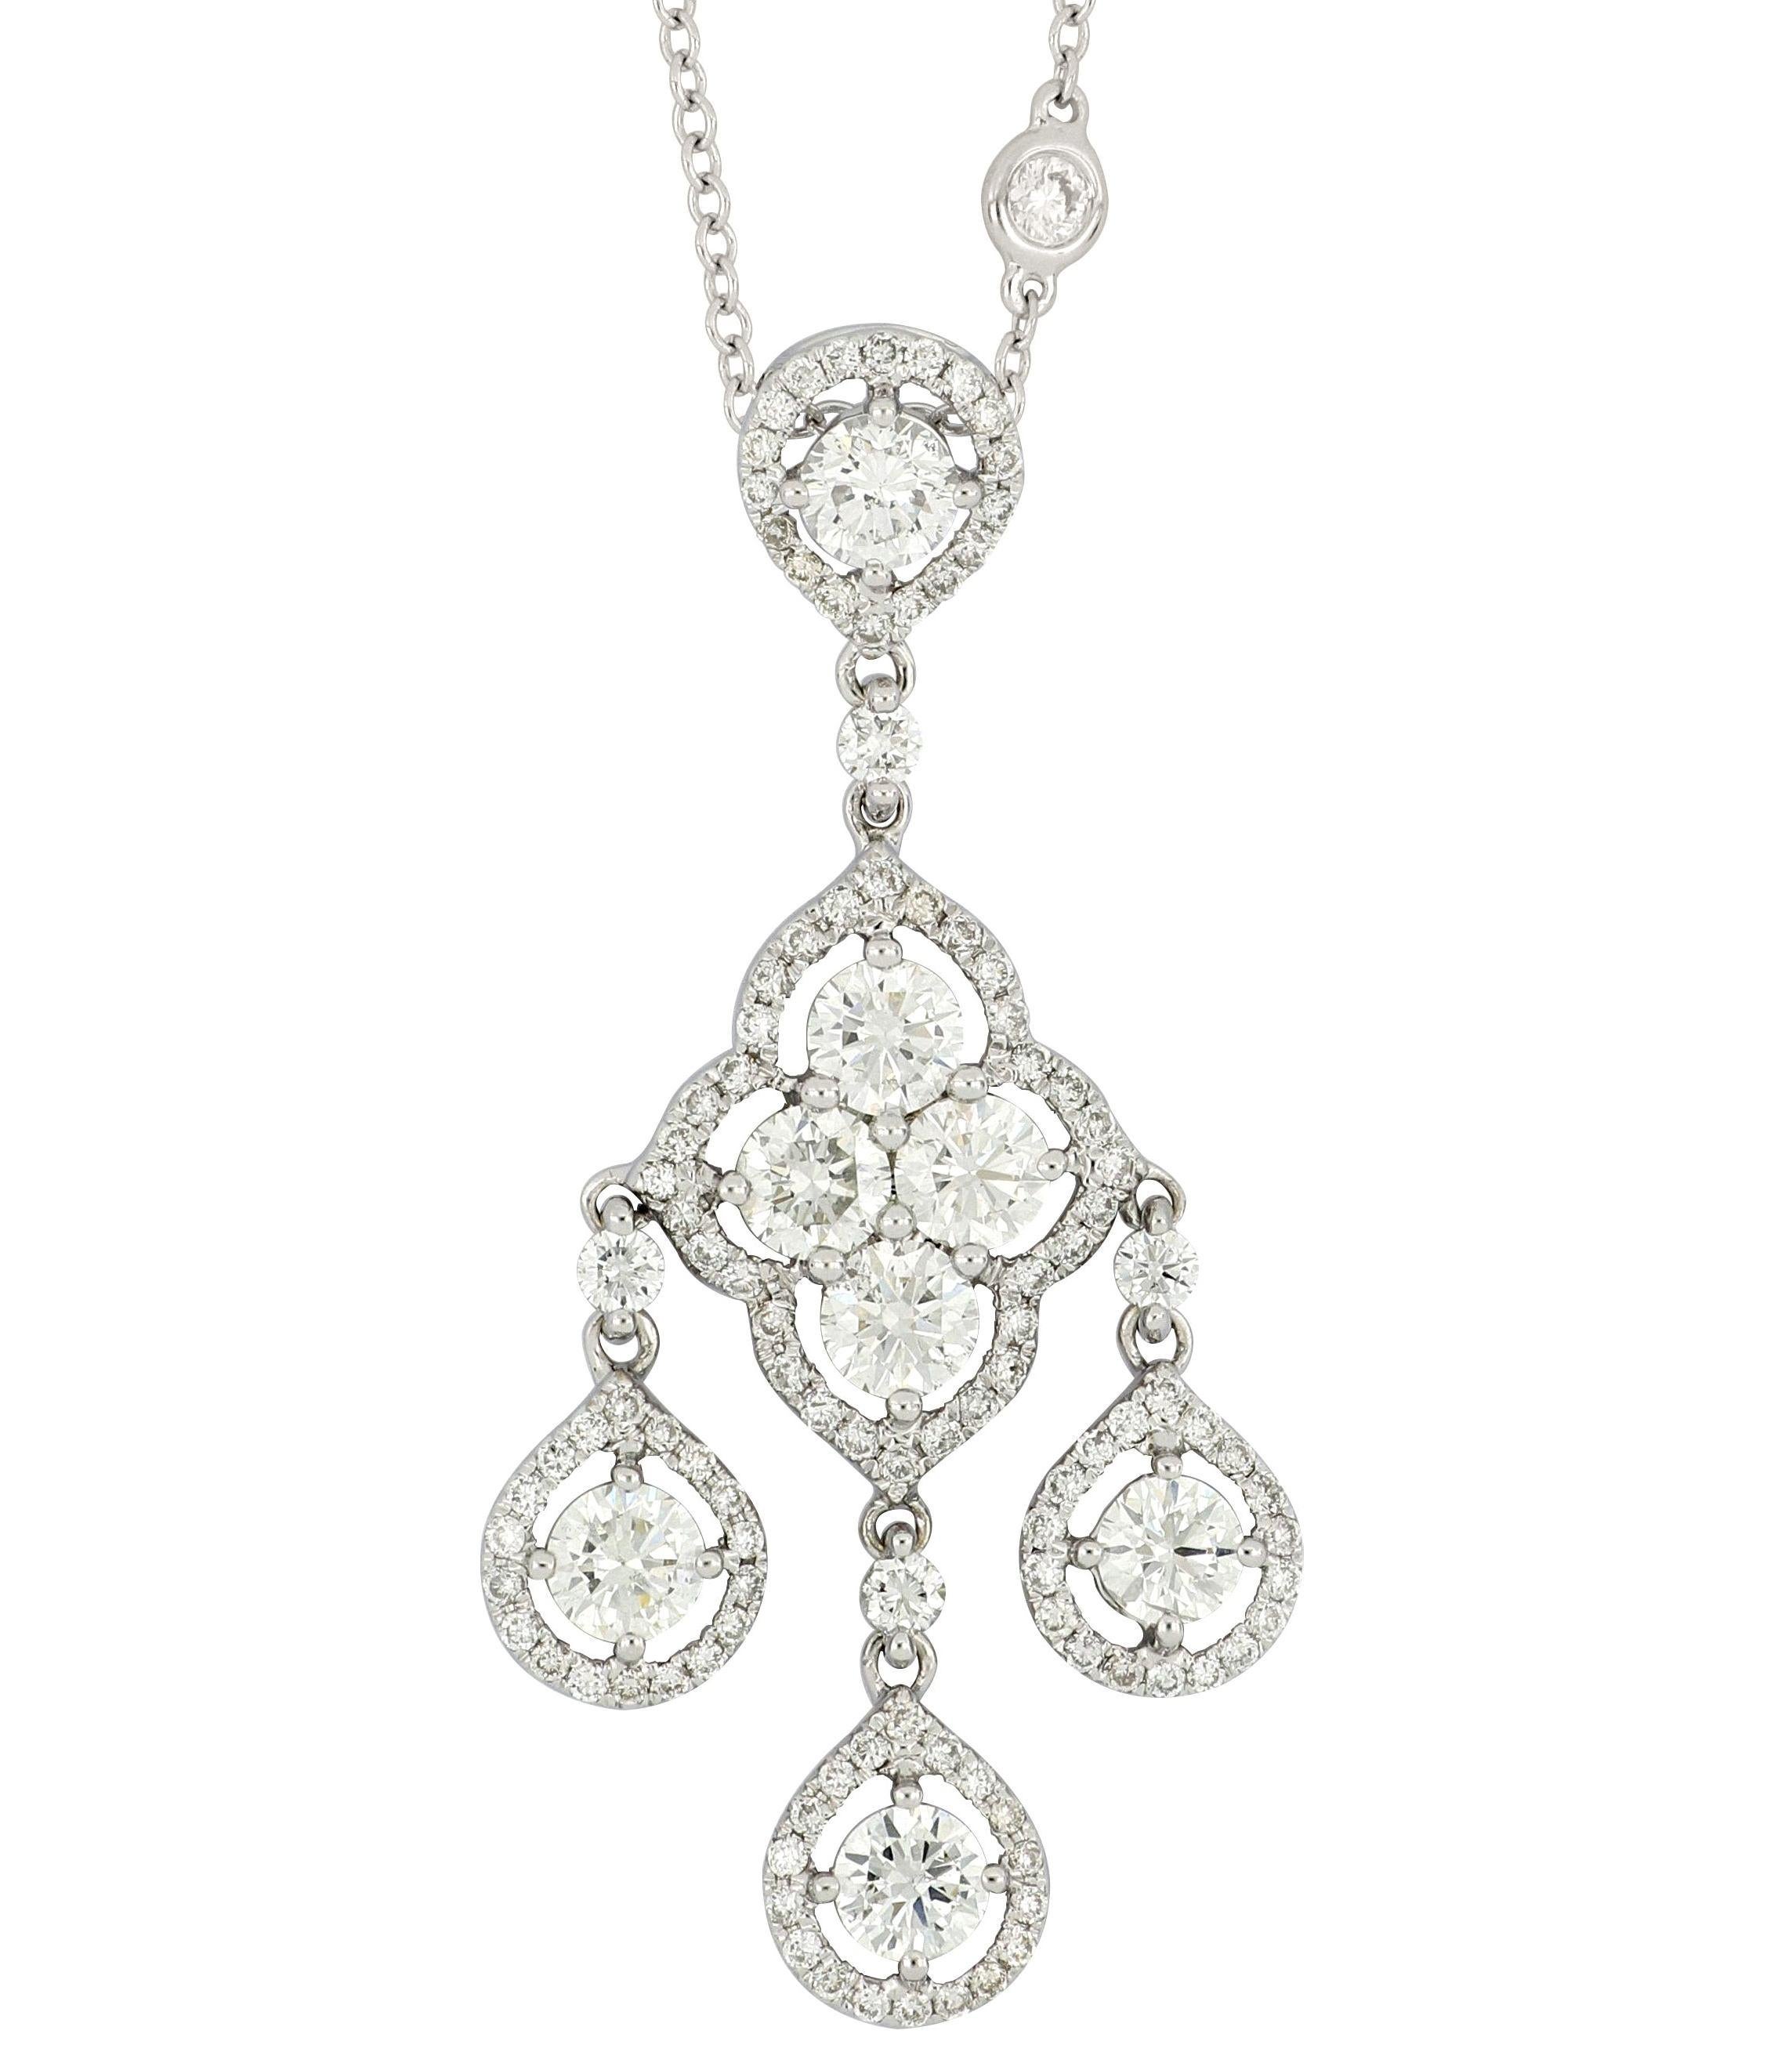 A beautiful diamond chandelier pendant with necklace, set with diamonds weighing 2.9 carats, mounted in 18 Karat white gold. The dangling pendant is composed of brilliant-cut diamonds with a floral pattern in the centre  suspending three clusters of